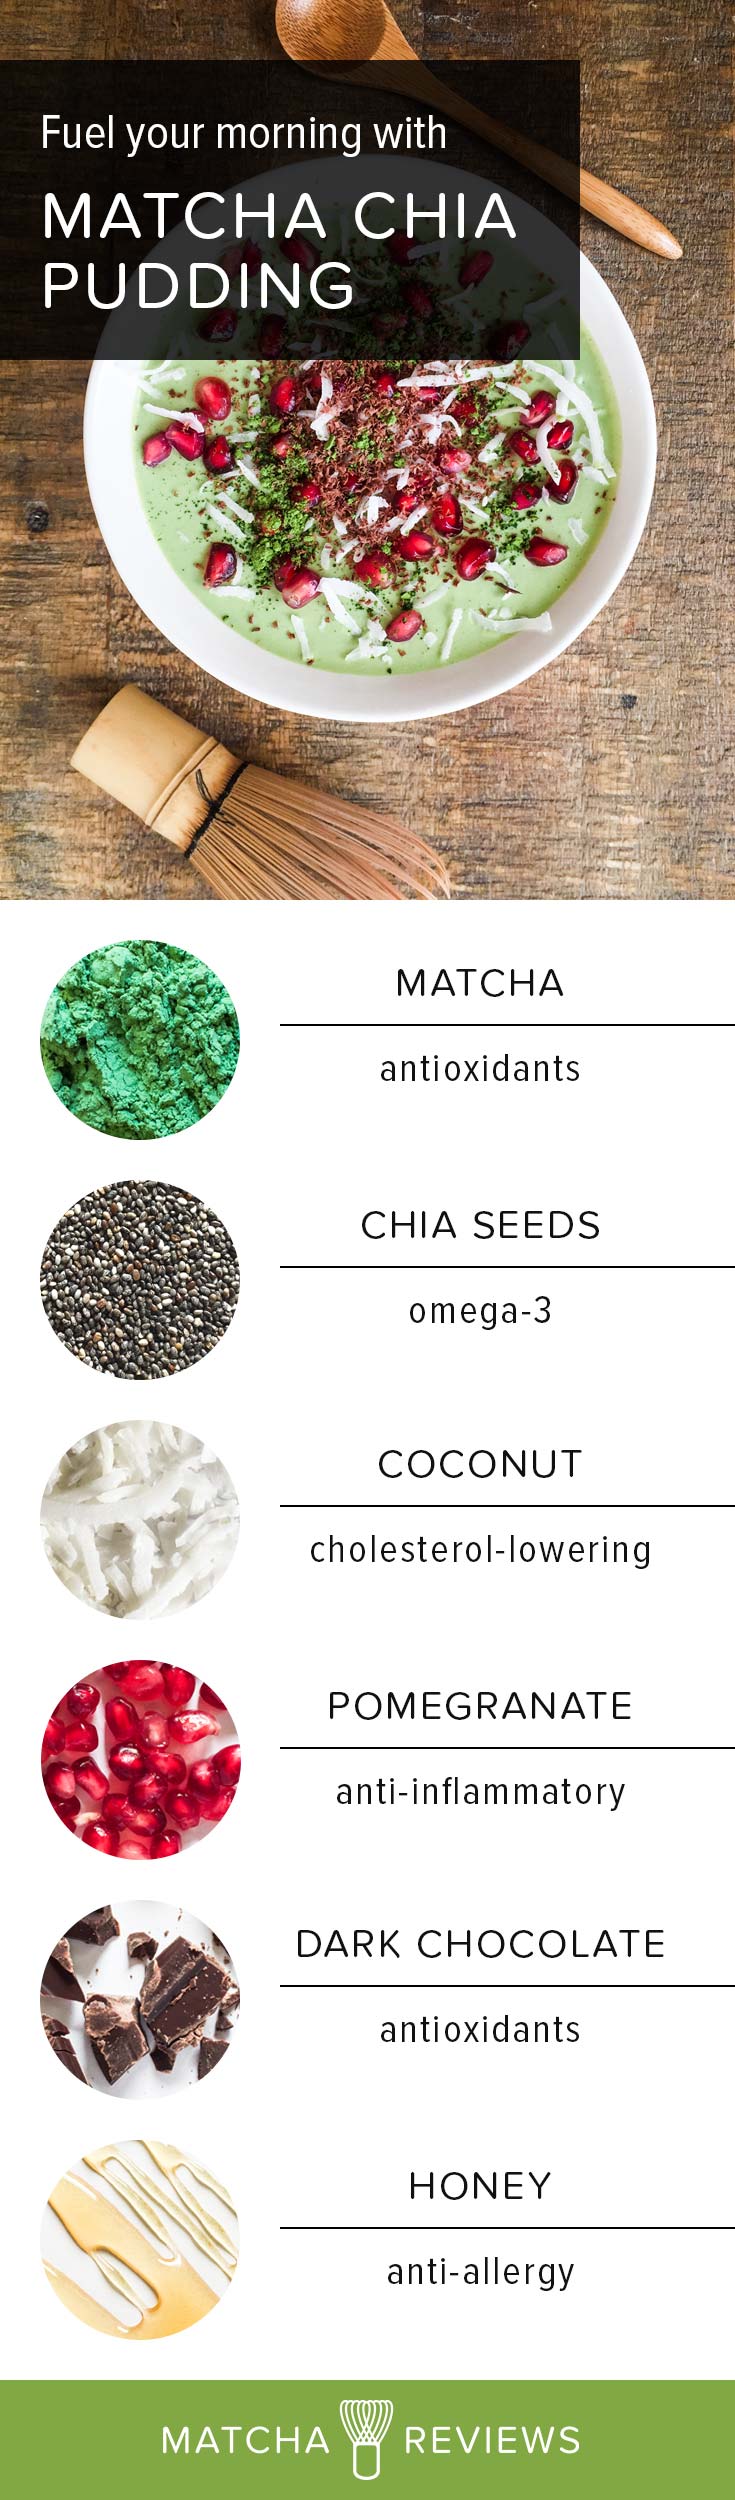 Matcha Reviews | Fuel Your Morning with Matcha Chia Pudding (Healthy Ingredients)